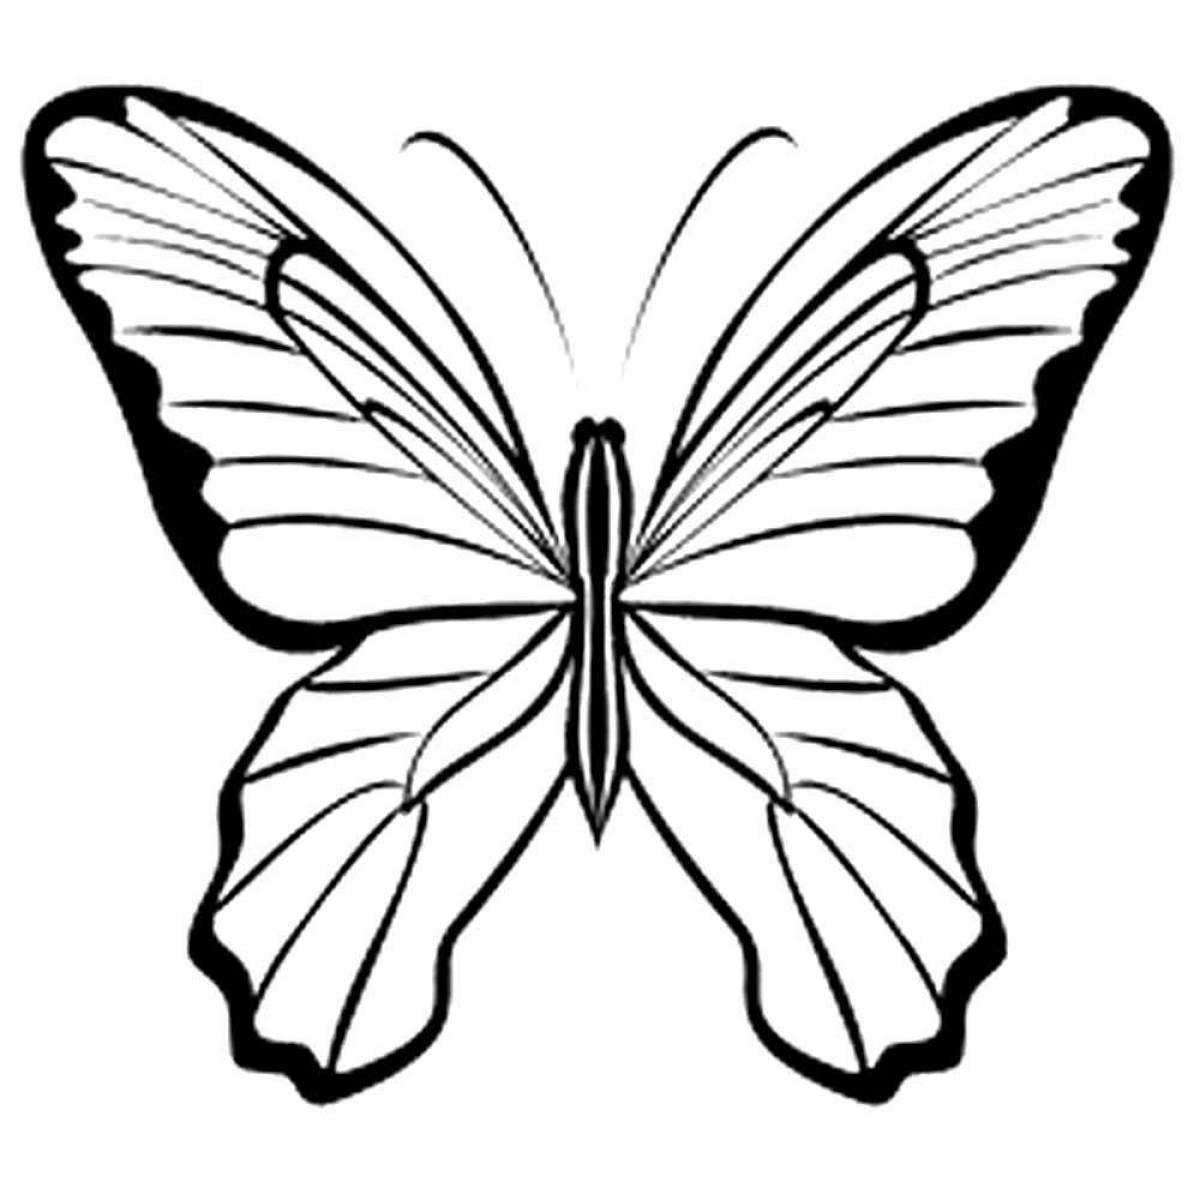 Impressive butterfly coloring page